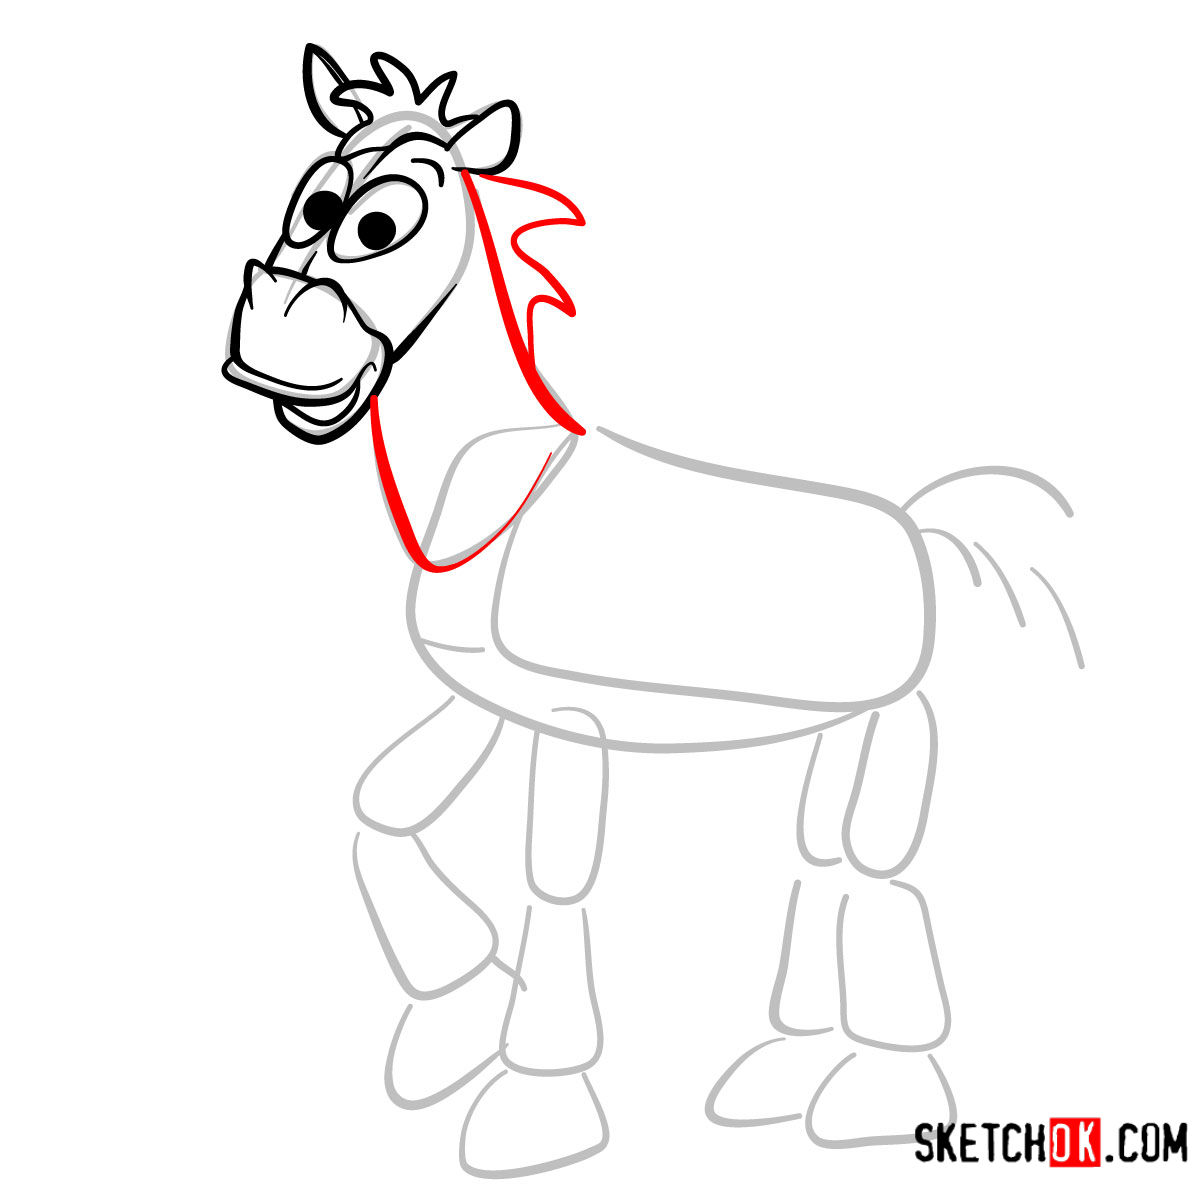 How to draw Bullseye from Toy Story Sketchok easy drawing guides